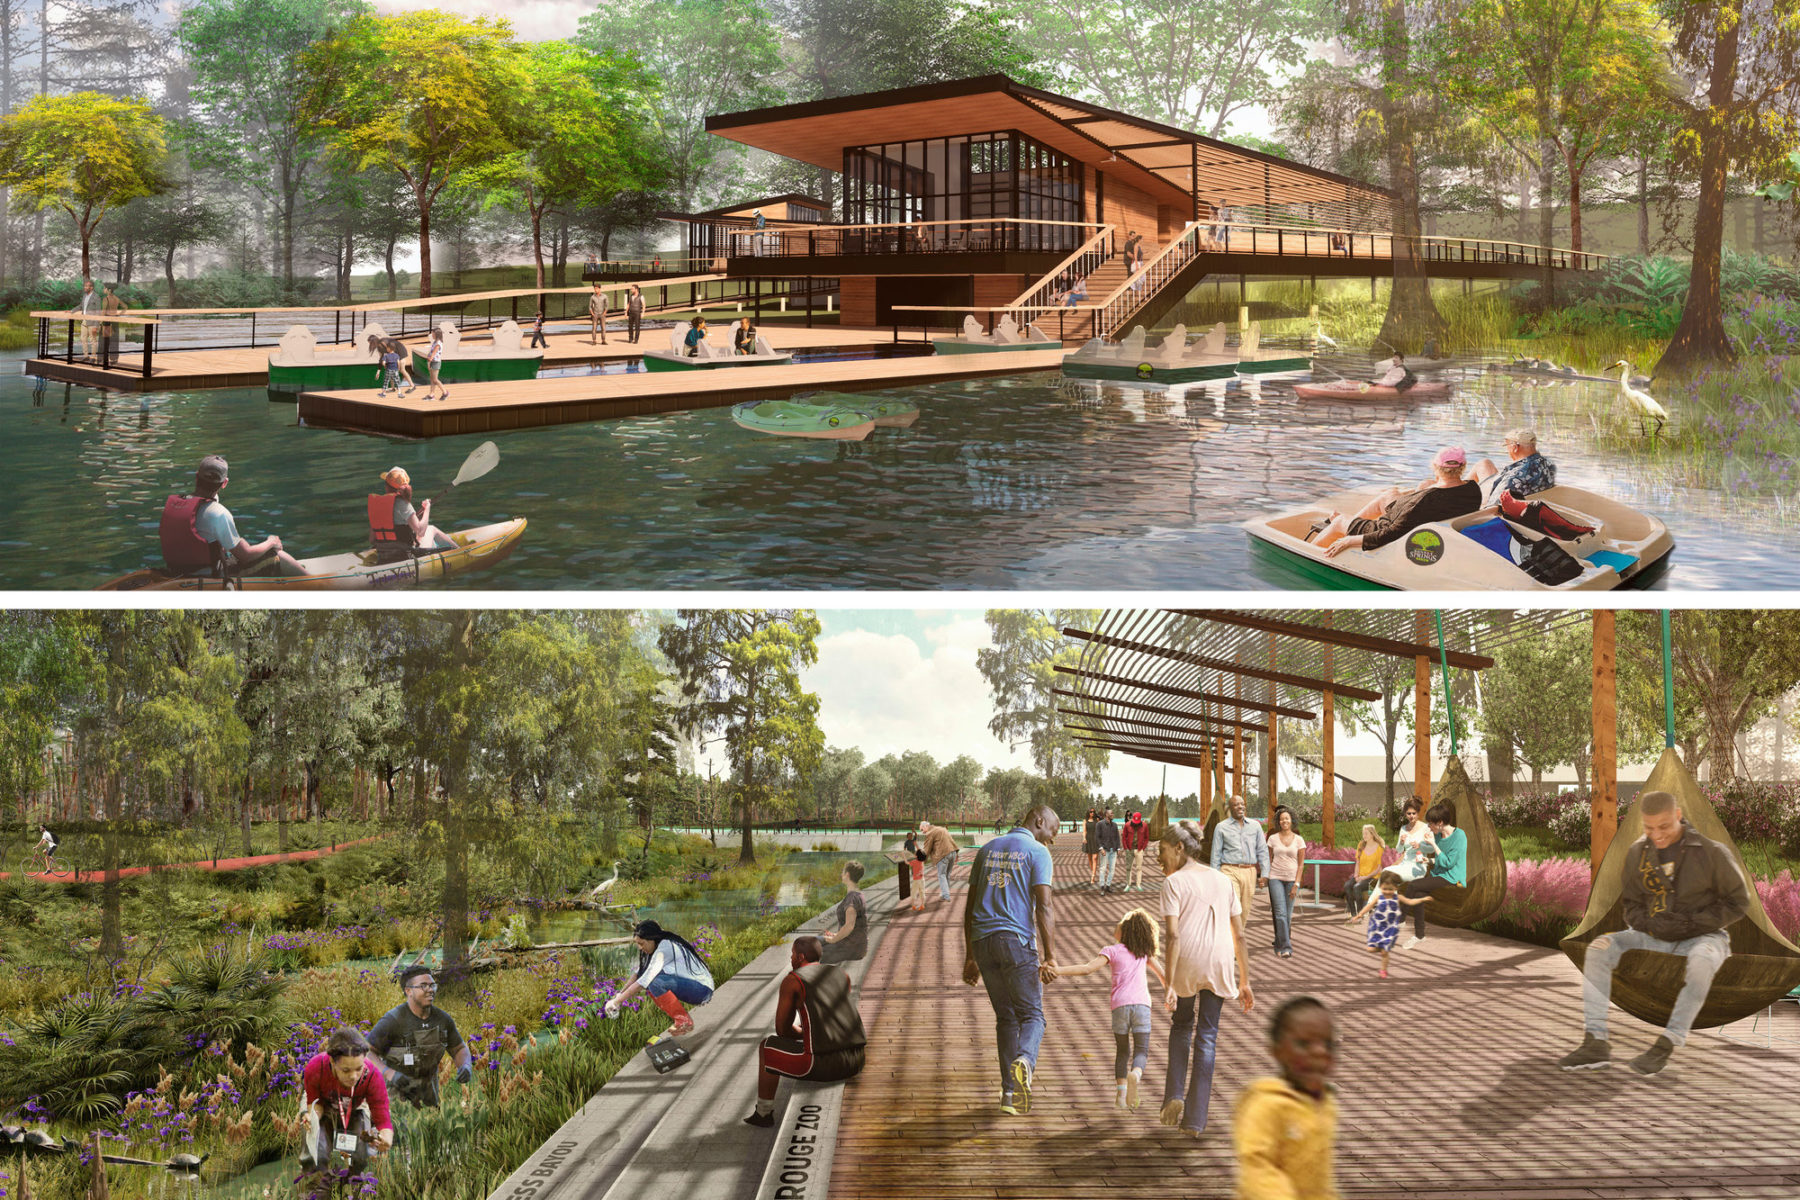 Two images: top image image is a rendering of people boating to the new nature center, bottom image is people walking around on the new nature walk